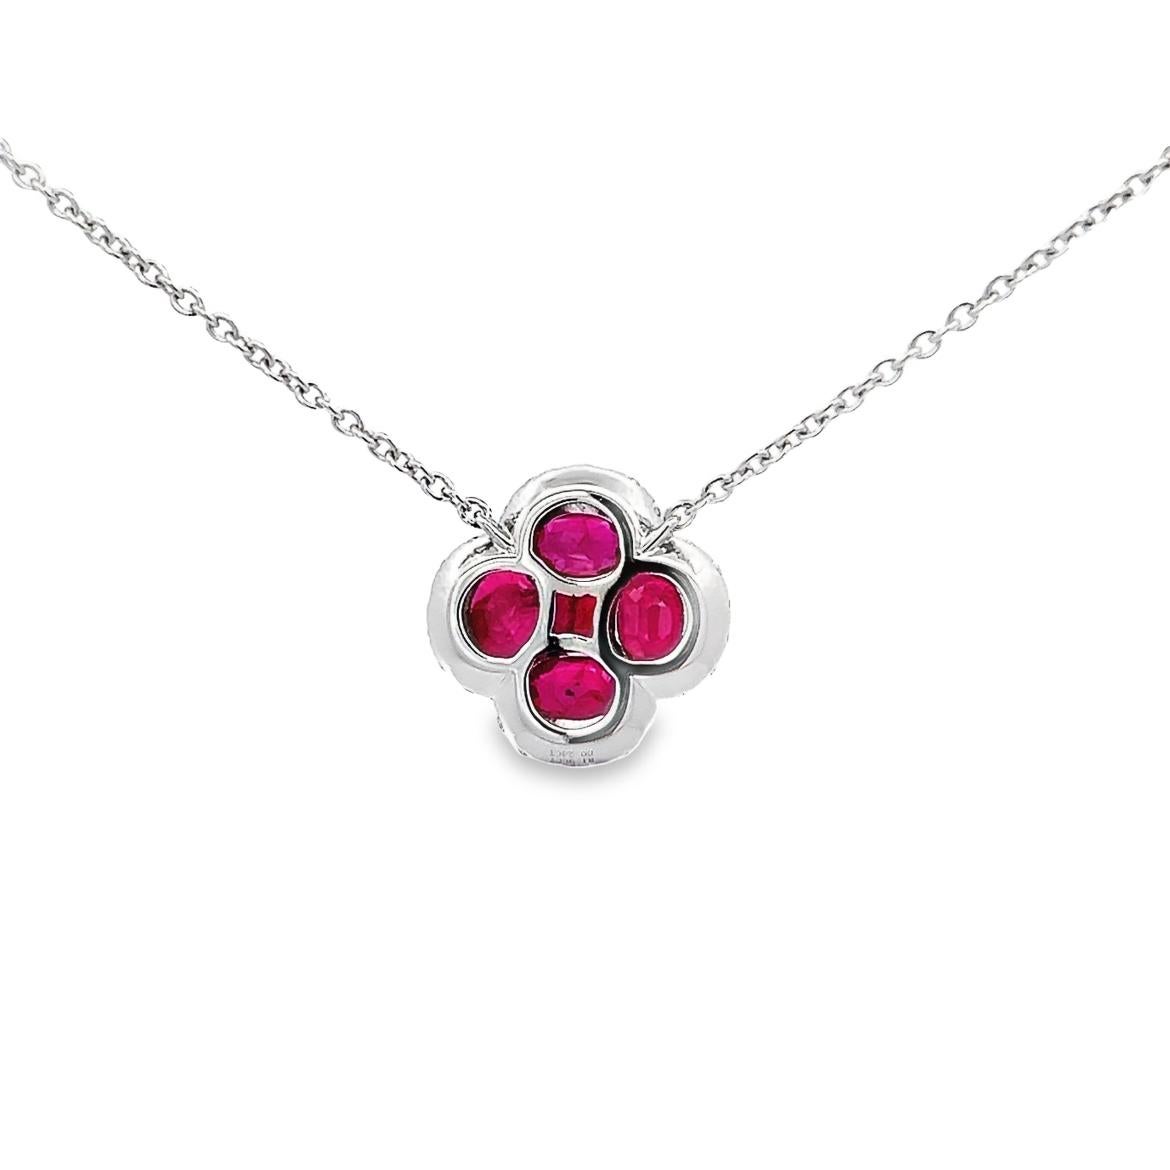 Oval Cut 2.14CT Rubies Flower Necklace Diamonds, set in 18K White Gold For Sale